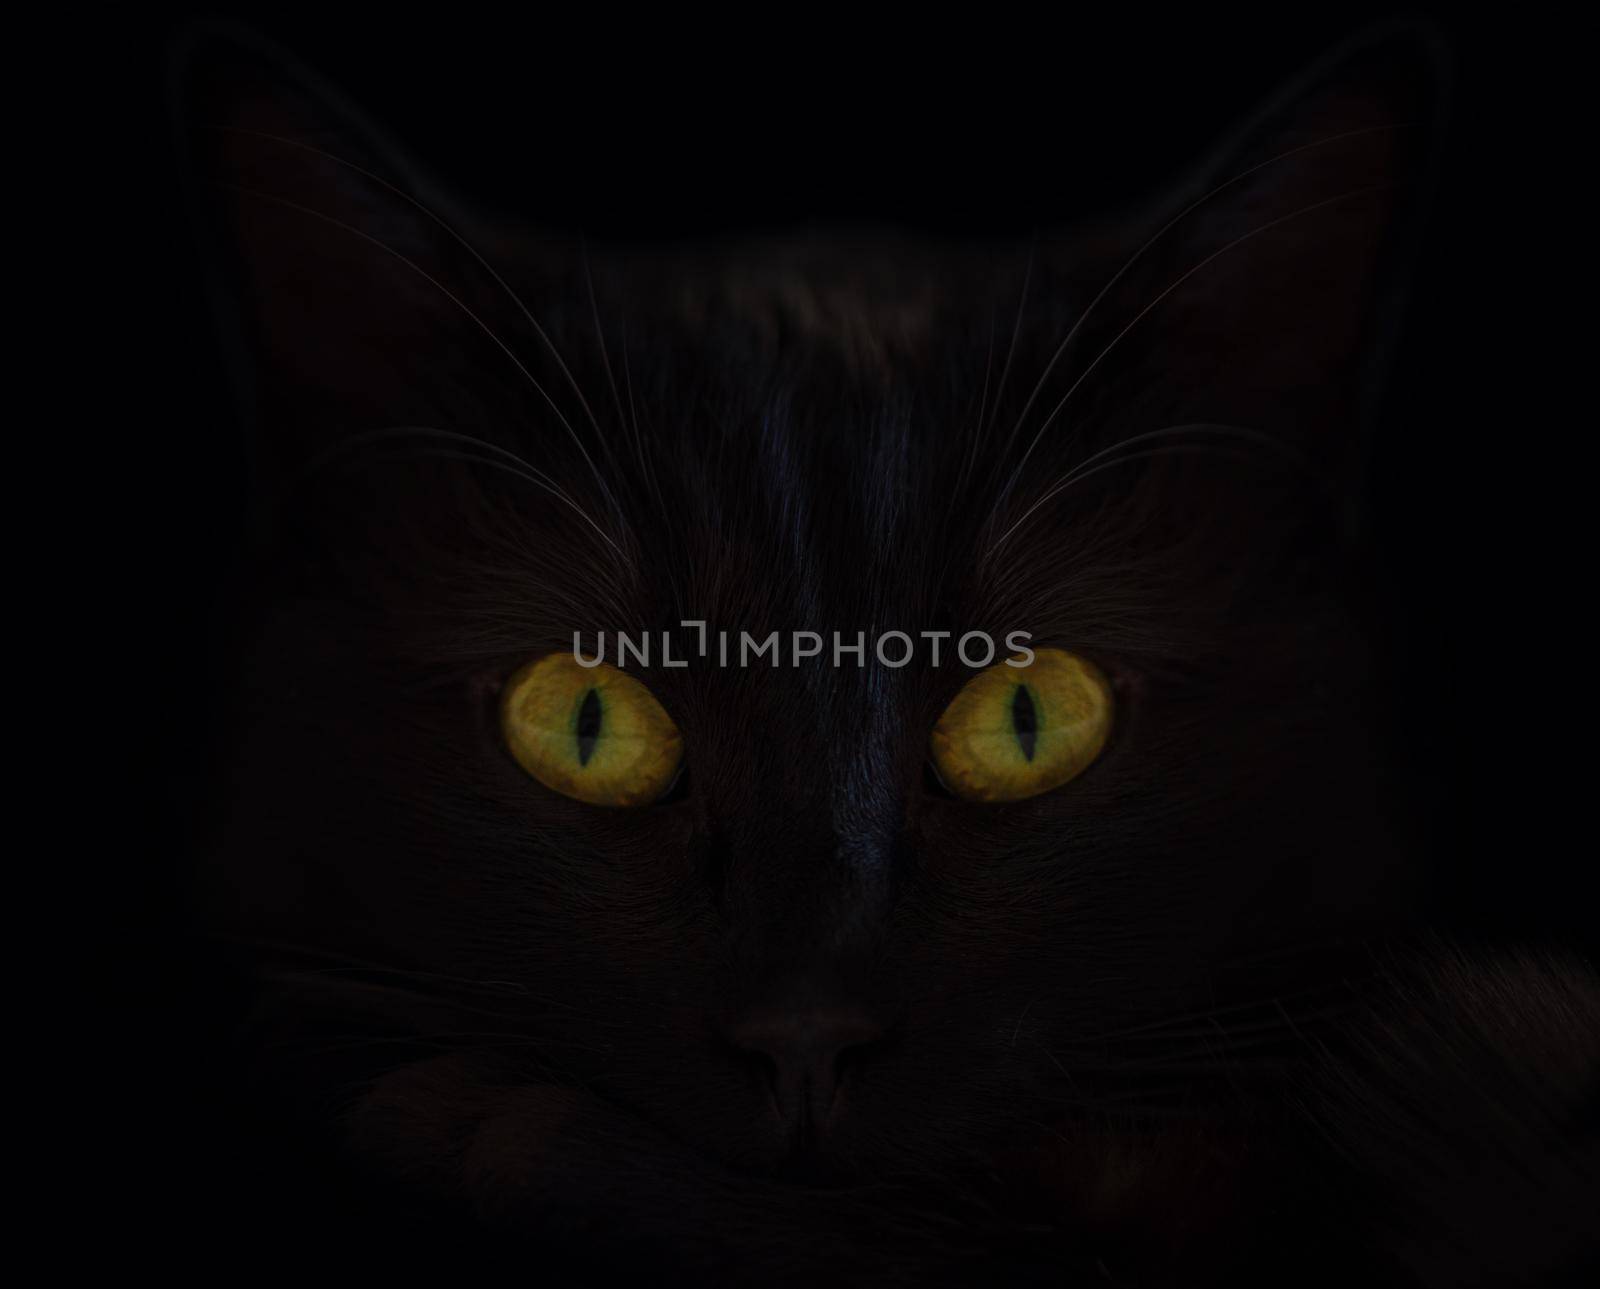 Black cat on a black background with bright yellow eyes